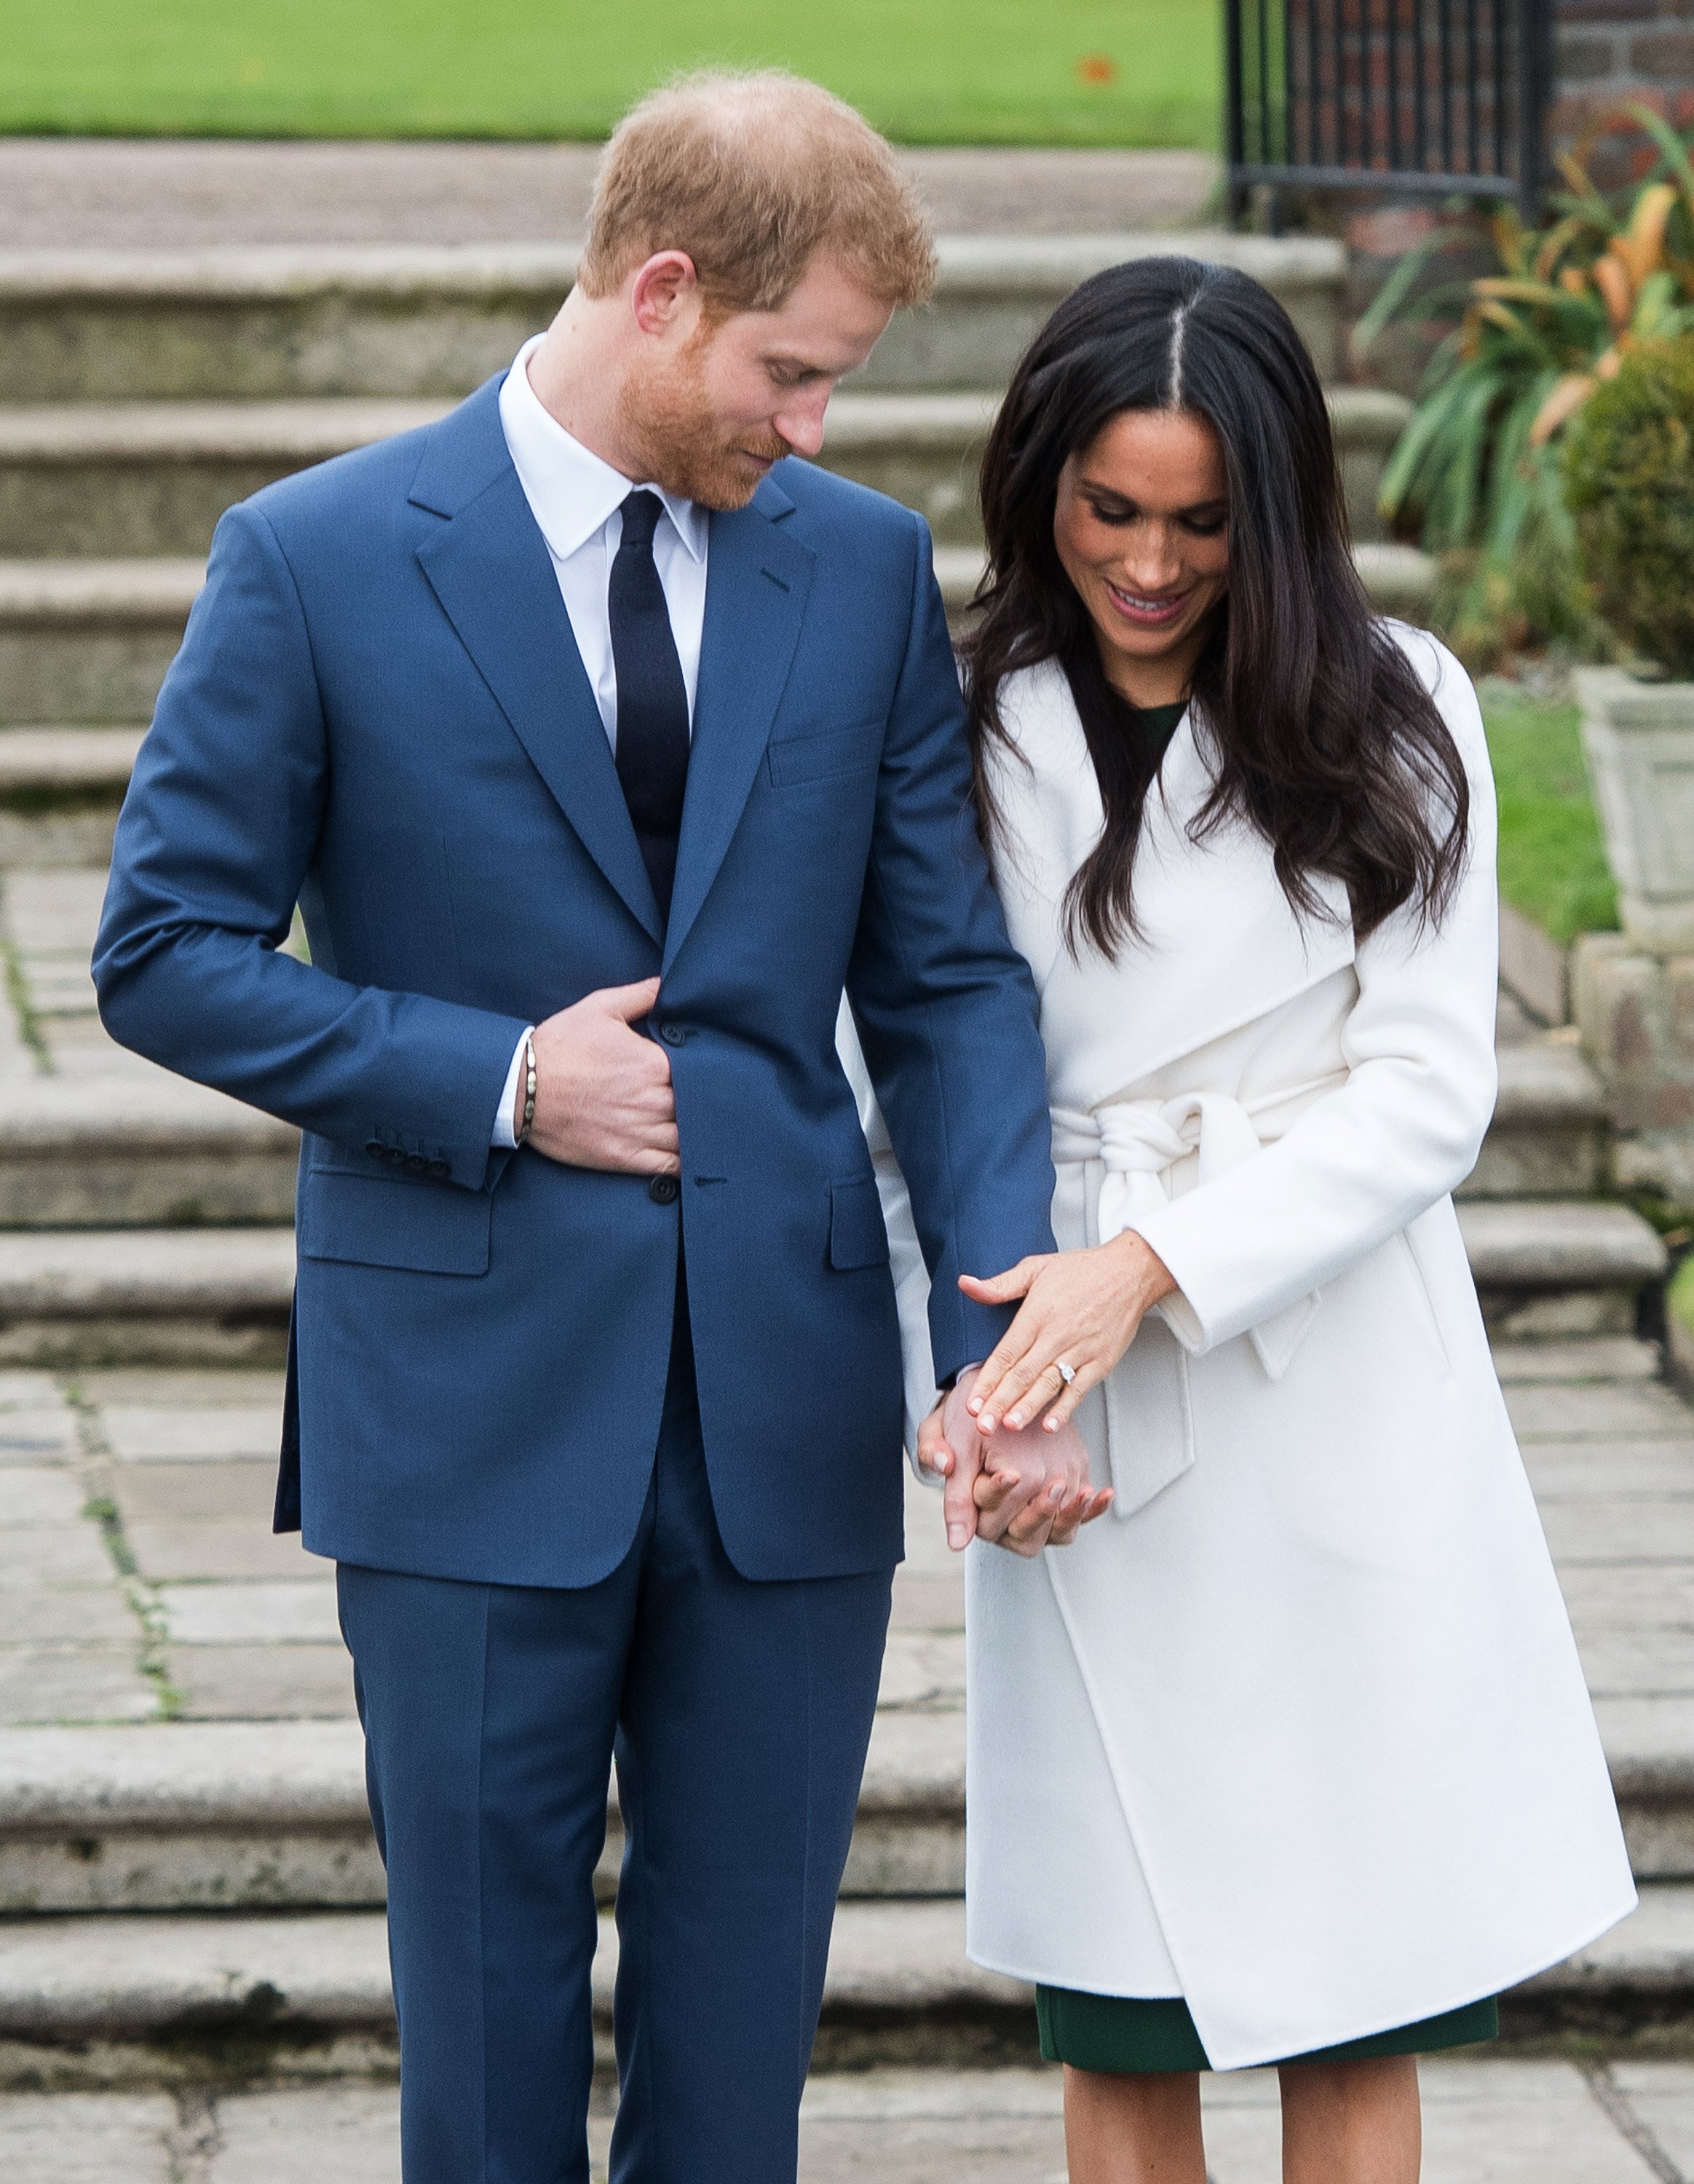 Prince Harry and Meghan Markle at a photocall in the Sunken Gardens at Kensington Palace after the announcement of their engagement on November 27, 2017, in London, England. | Source: Getty Images